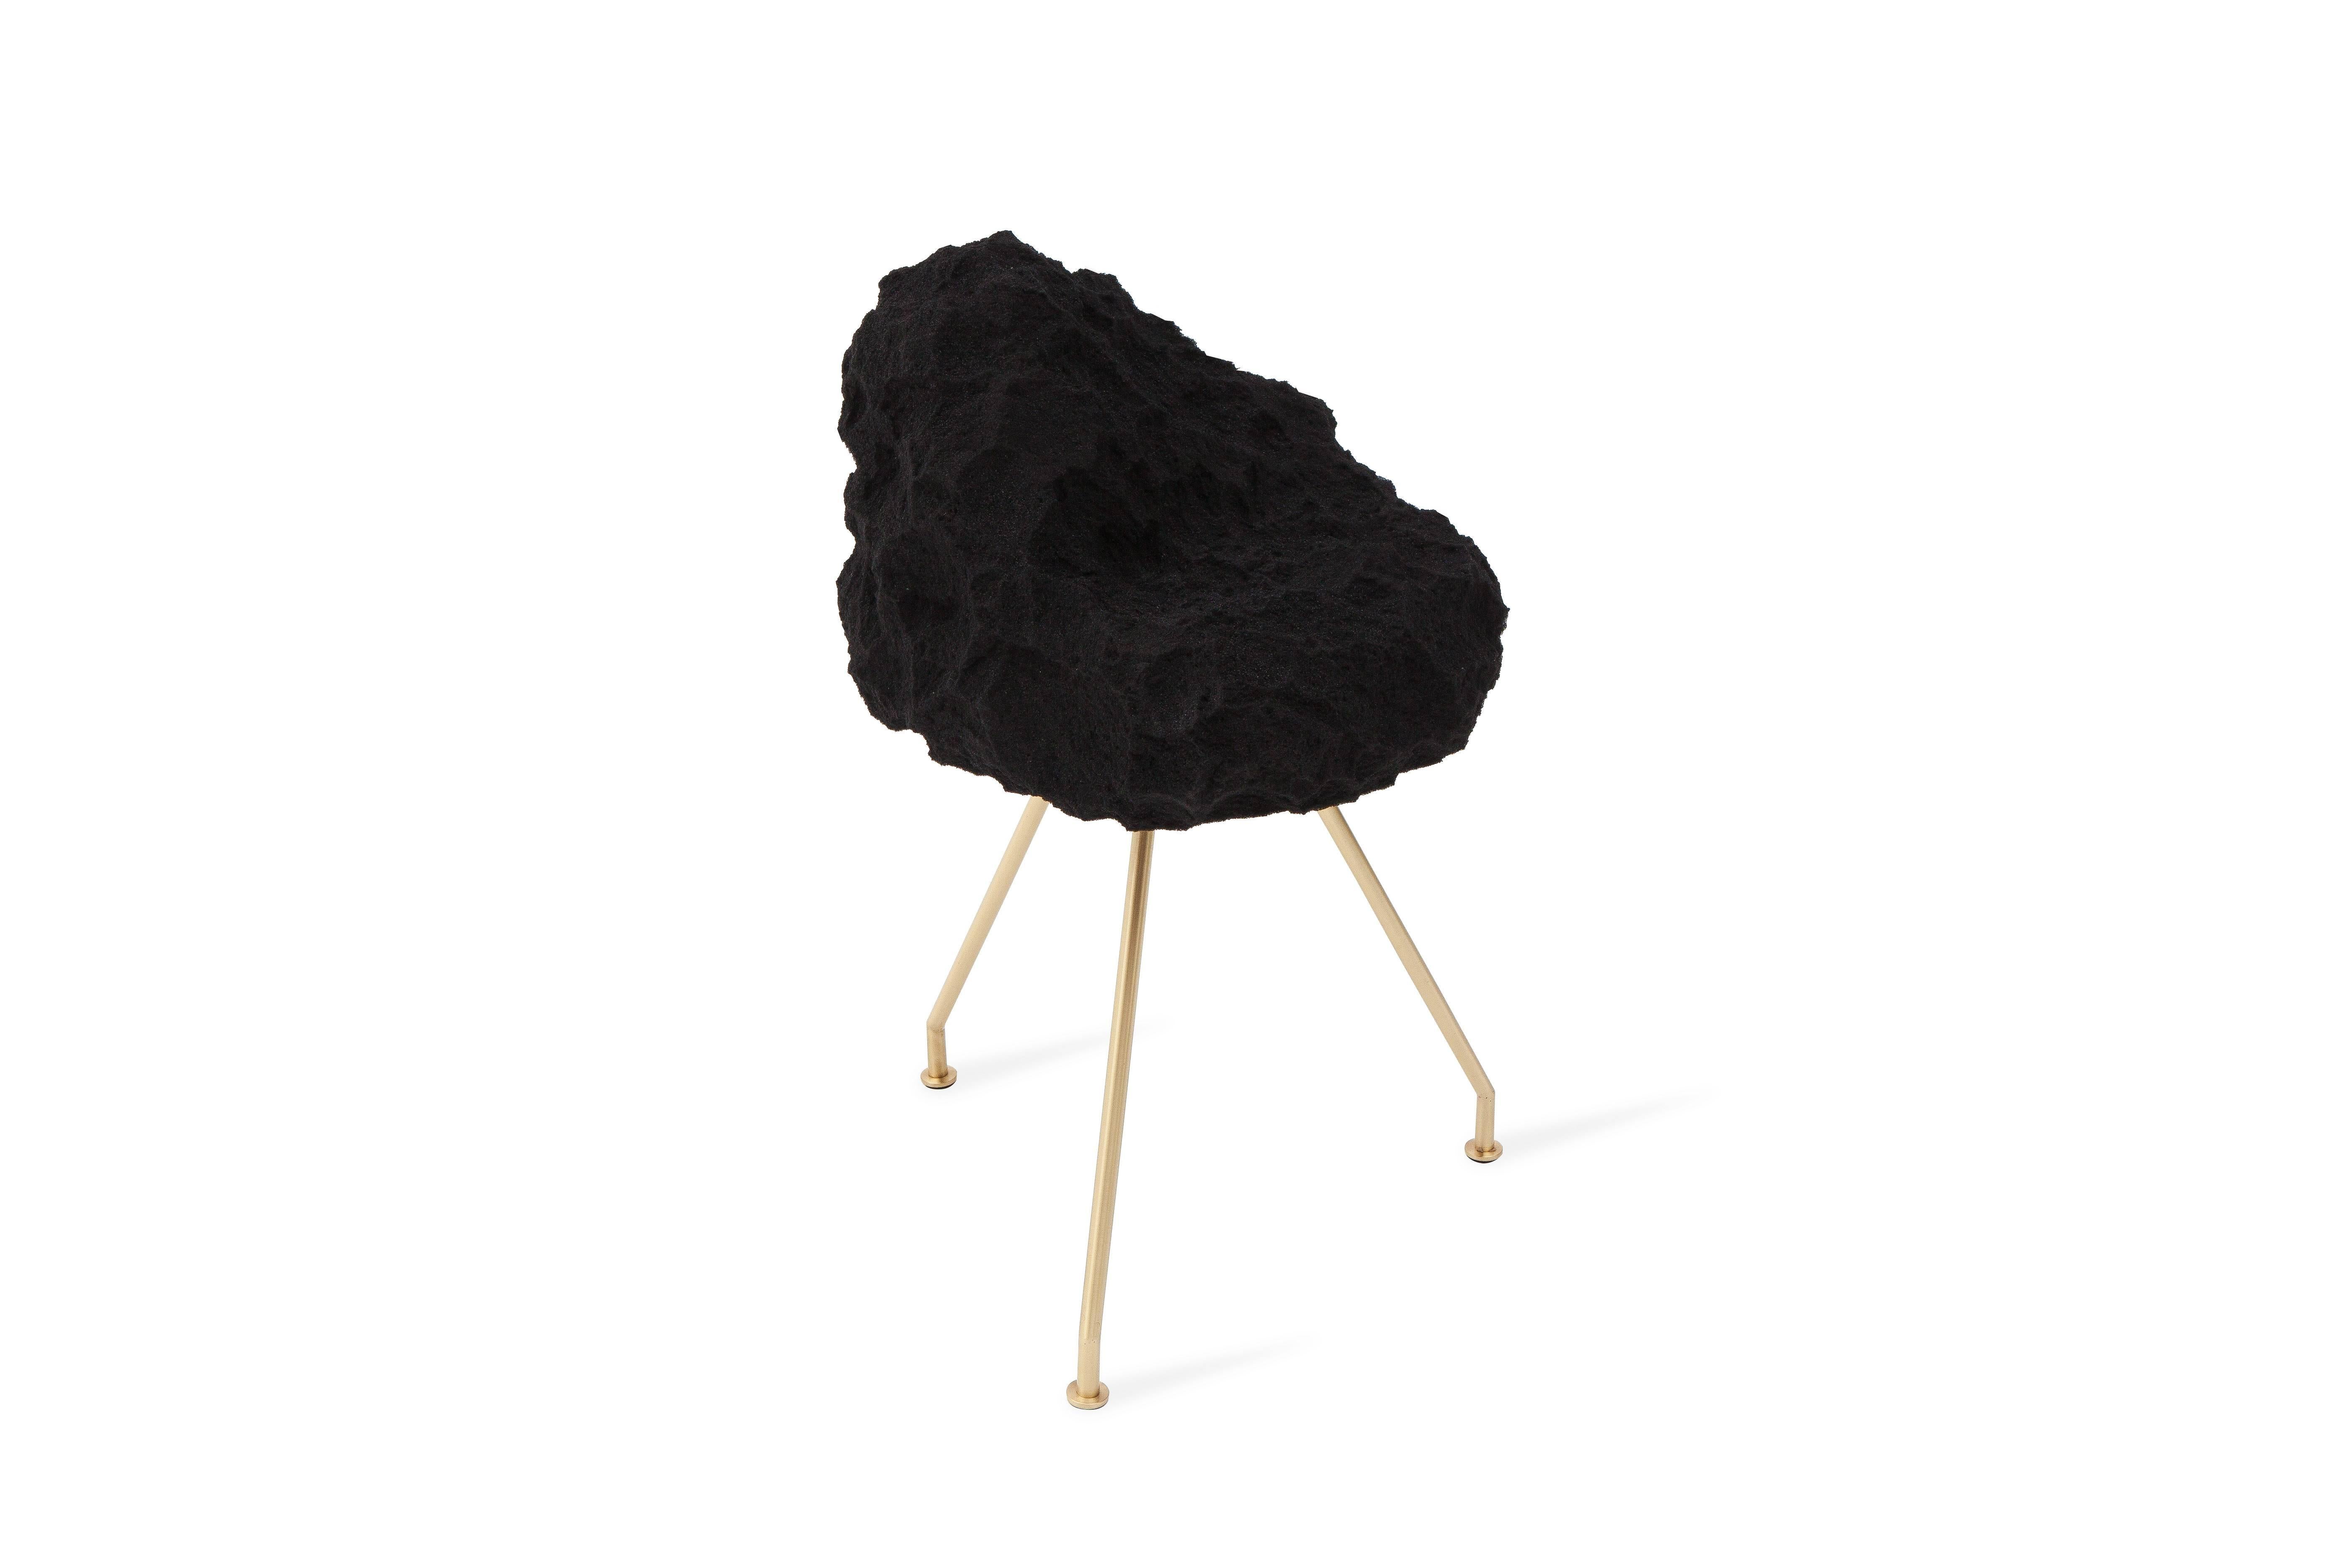 Meteorit stool by Morgane Roux, Atelier Aveus
Painted Foam and Brass
Measures: 53 x 48 x 48 cm
Signed and numbered
Edition of 8

The W.A.I.O. (We are in Orbit) collection features a set of furnitures whose conception has been inspired by the